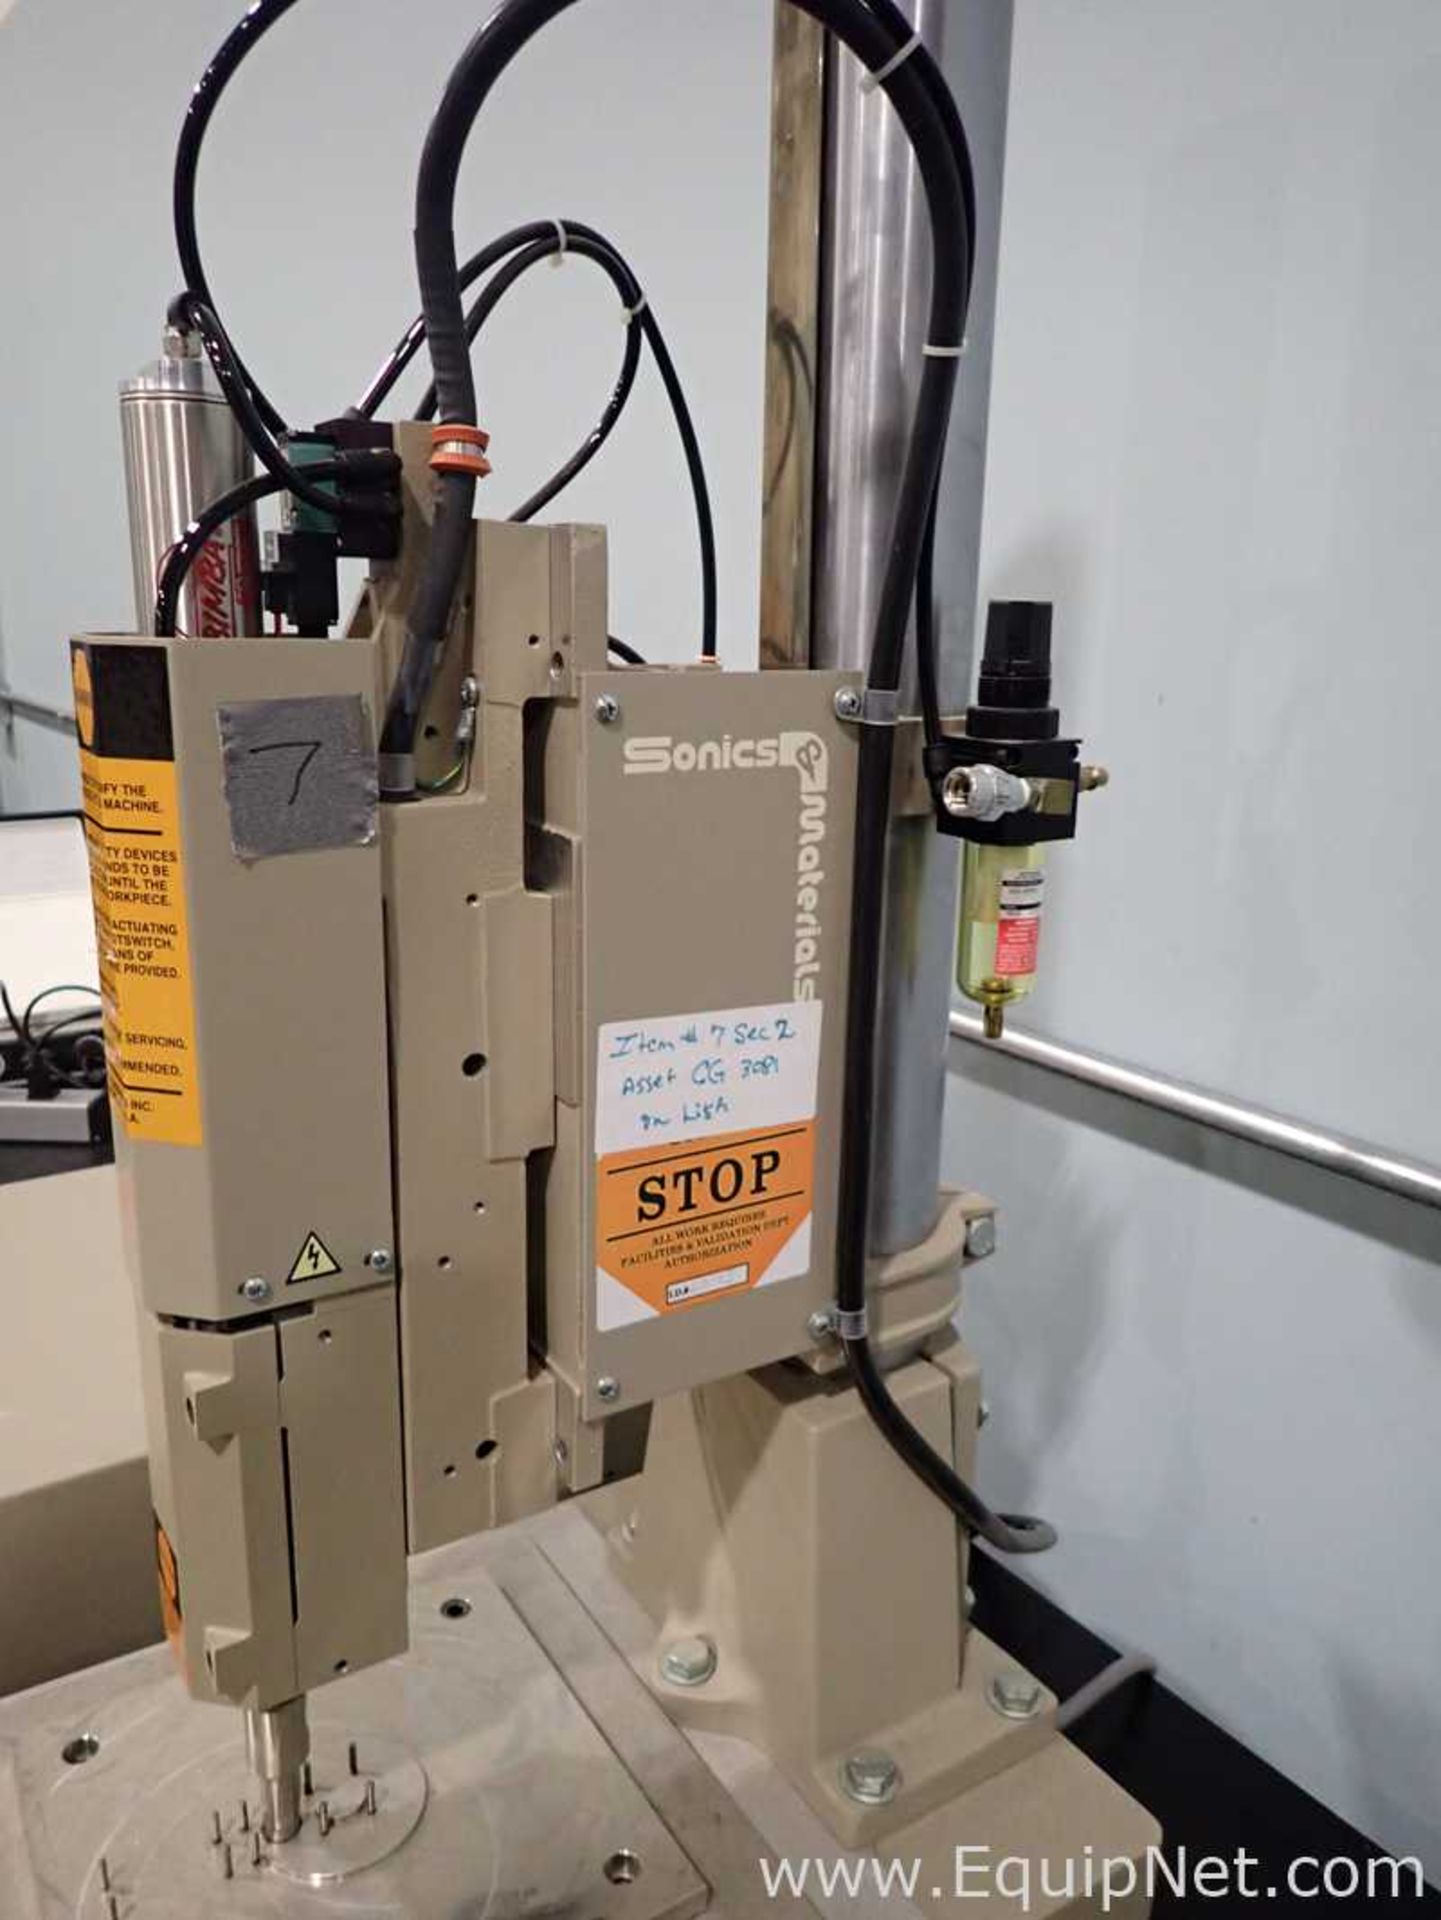 Sonics and Materials 4095 Pneumatic Press with Microsonic Processor for Ultrasonic Plastic Assembly - Image 4 of 10